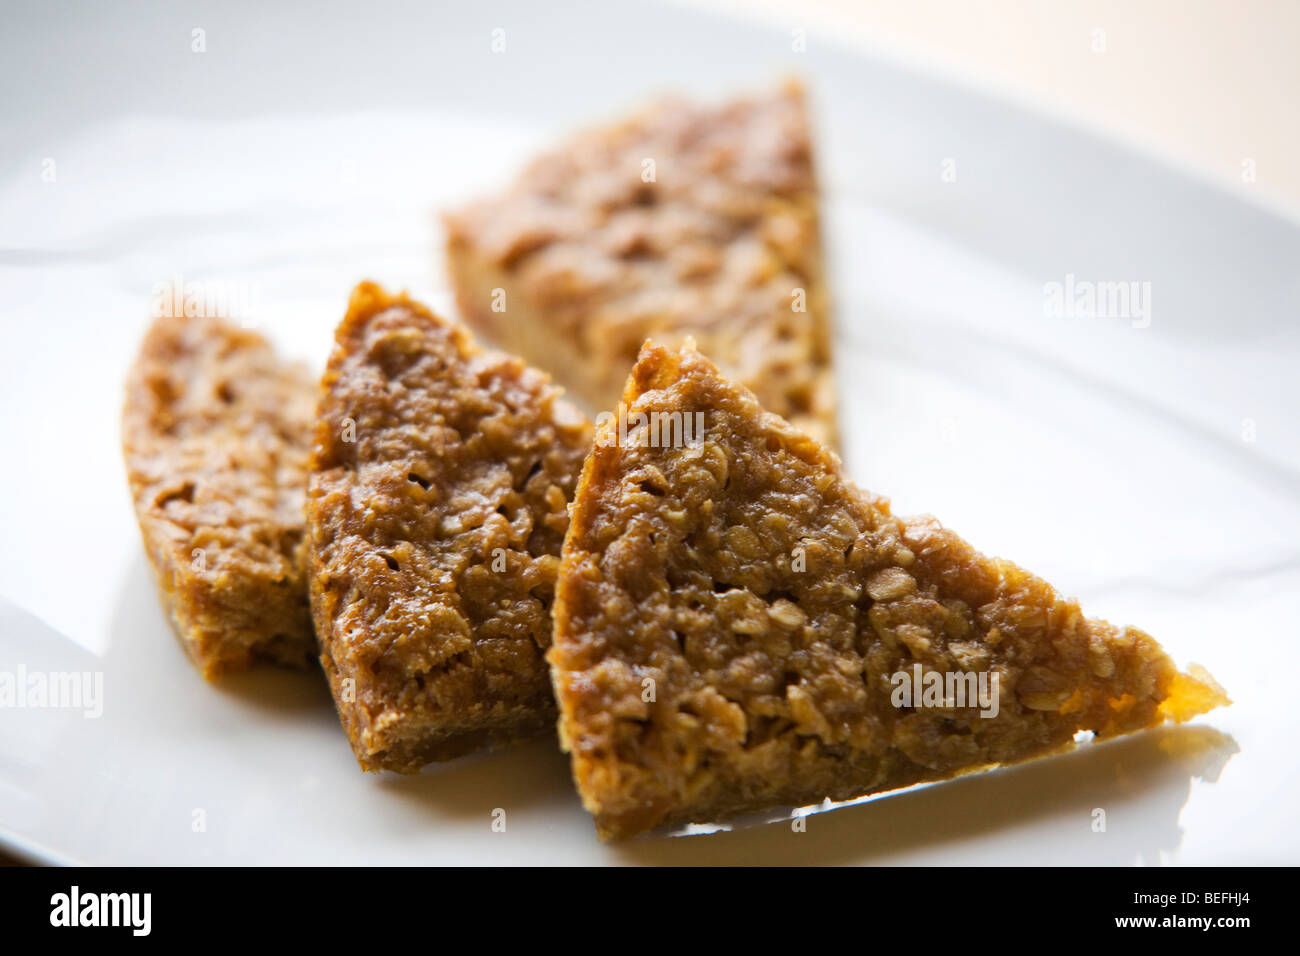 A flap jack on a plate Stock Photo